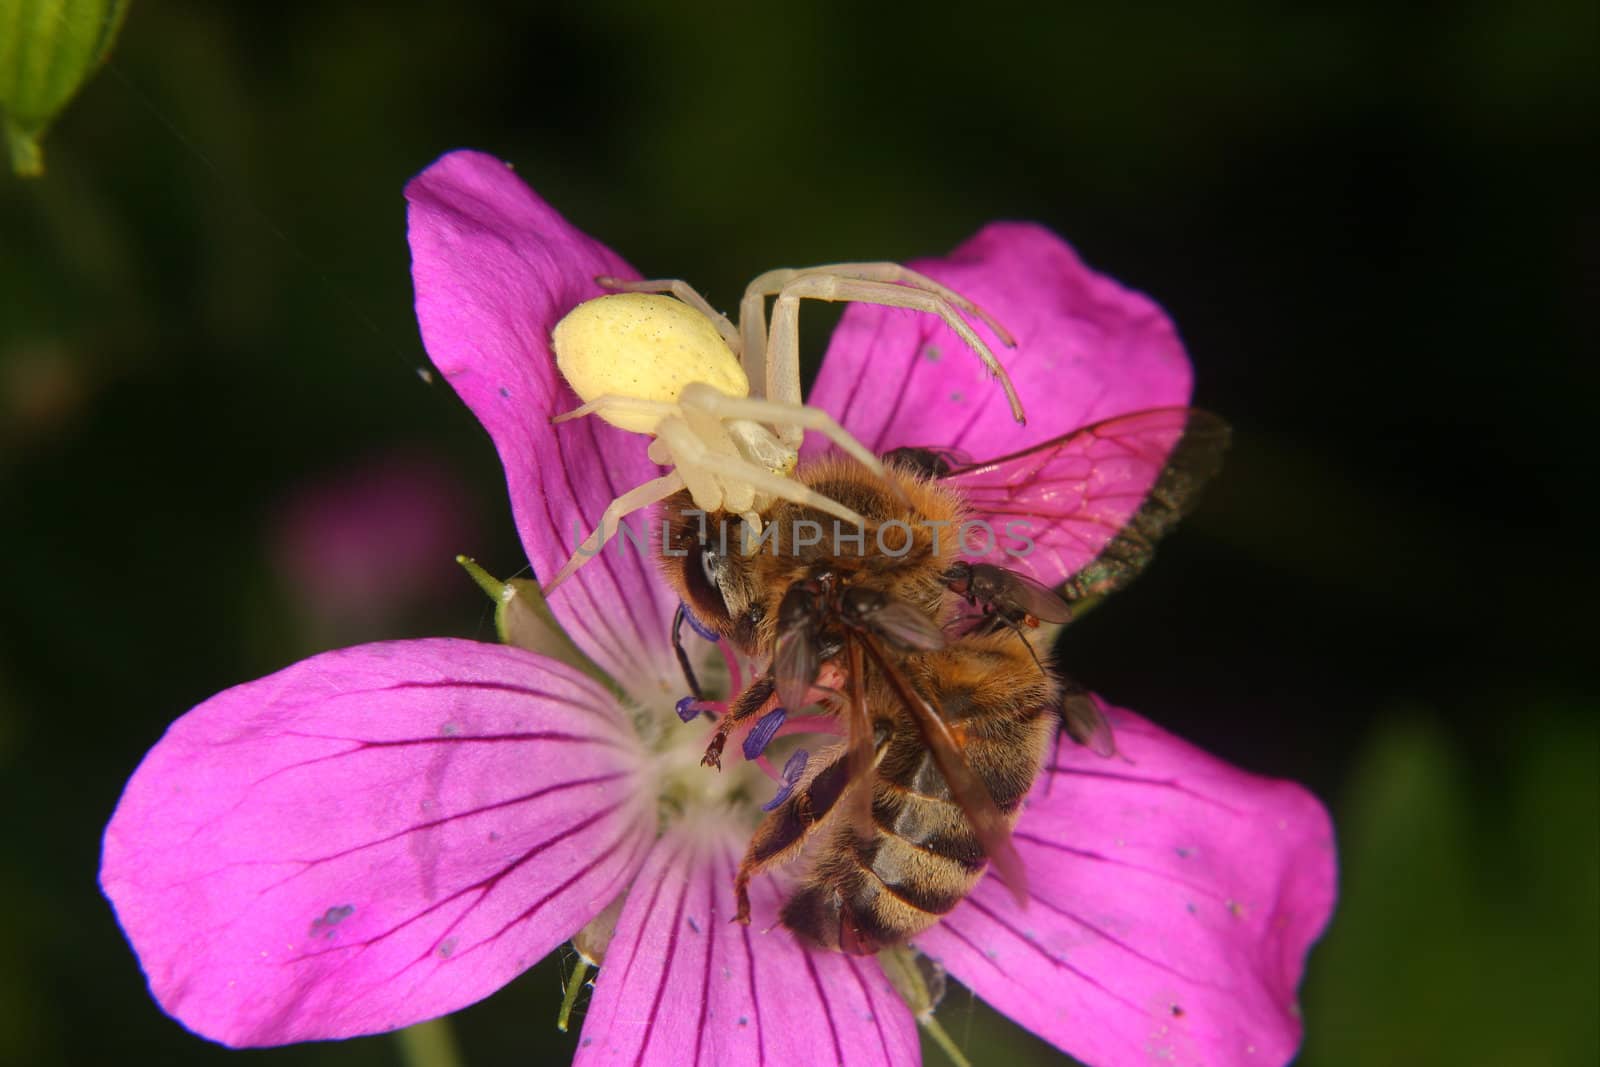 Goldenrod  crab spider (Misumena vatia)  - Female on a flower with a captured bee